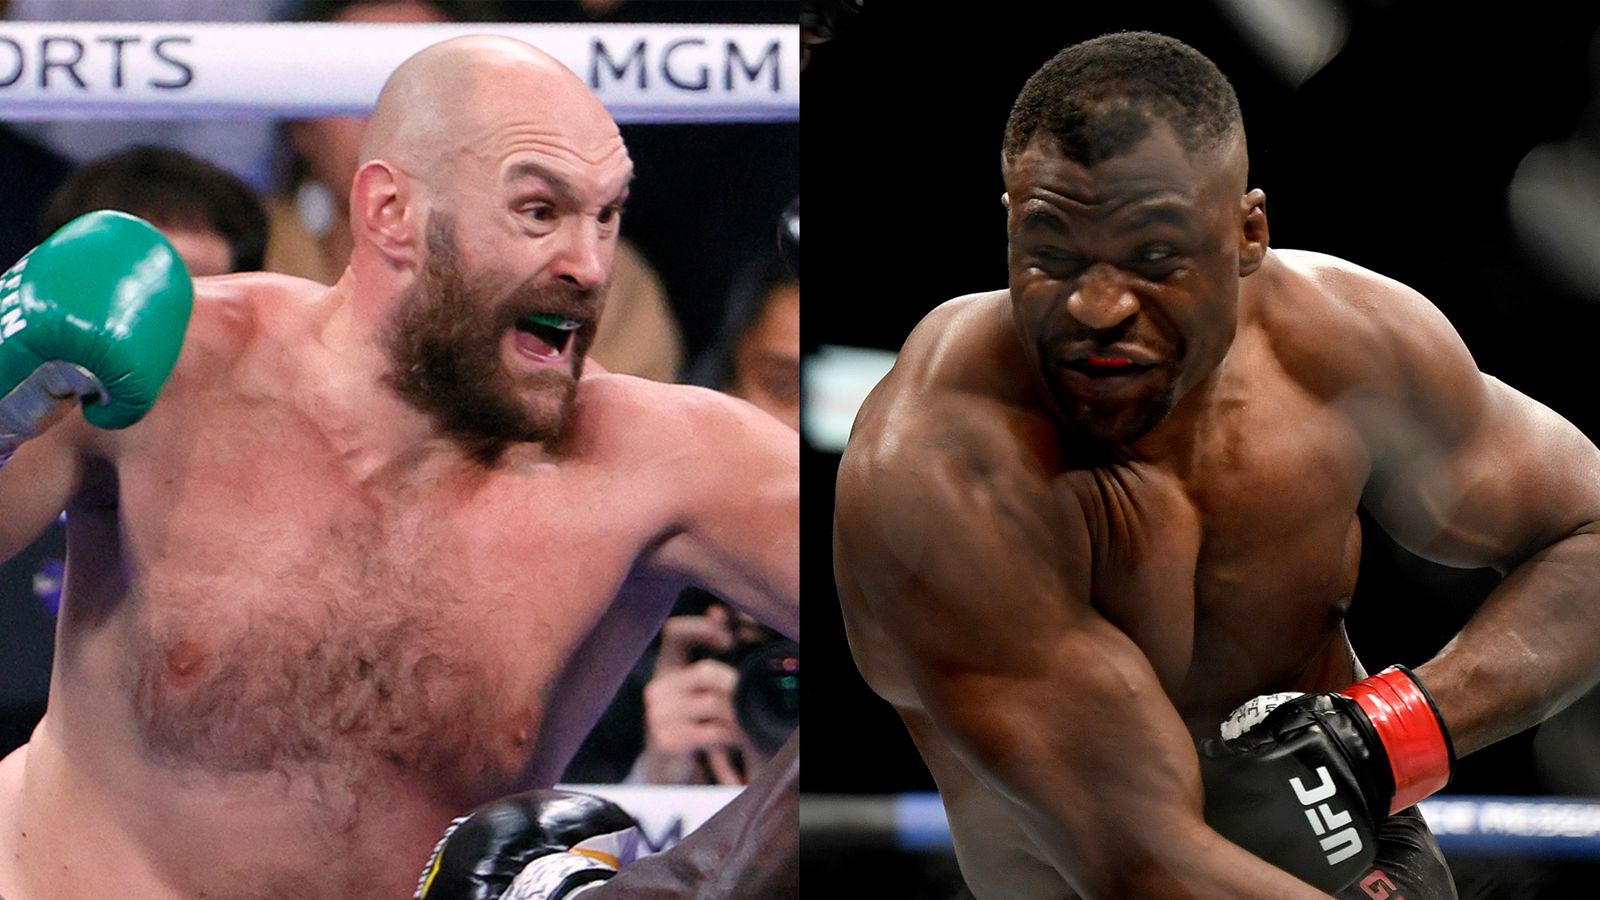 Why won't Tyson Fury fight any of the top contenders in the division? -  Quora